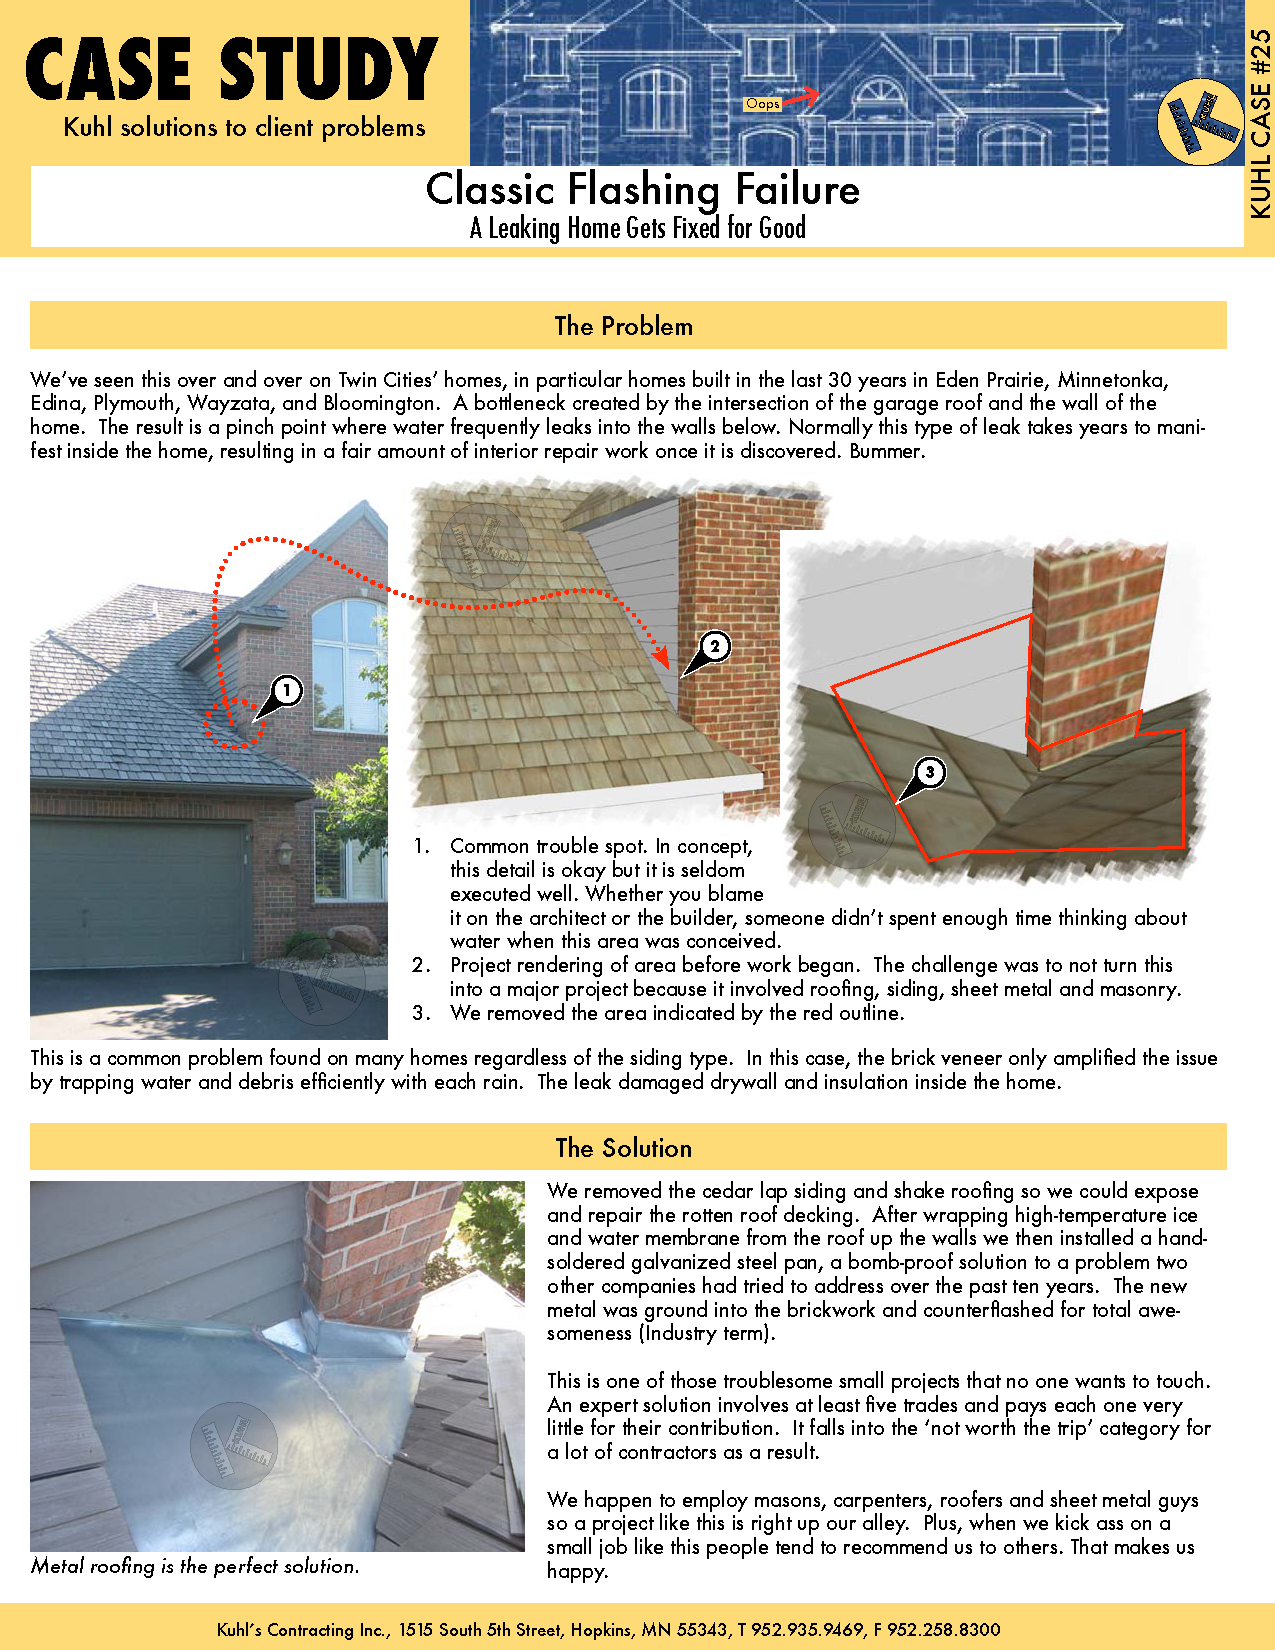 Classic Flashing Failure: Roof Flashing Experts to the Rescue